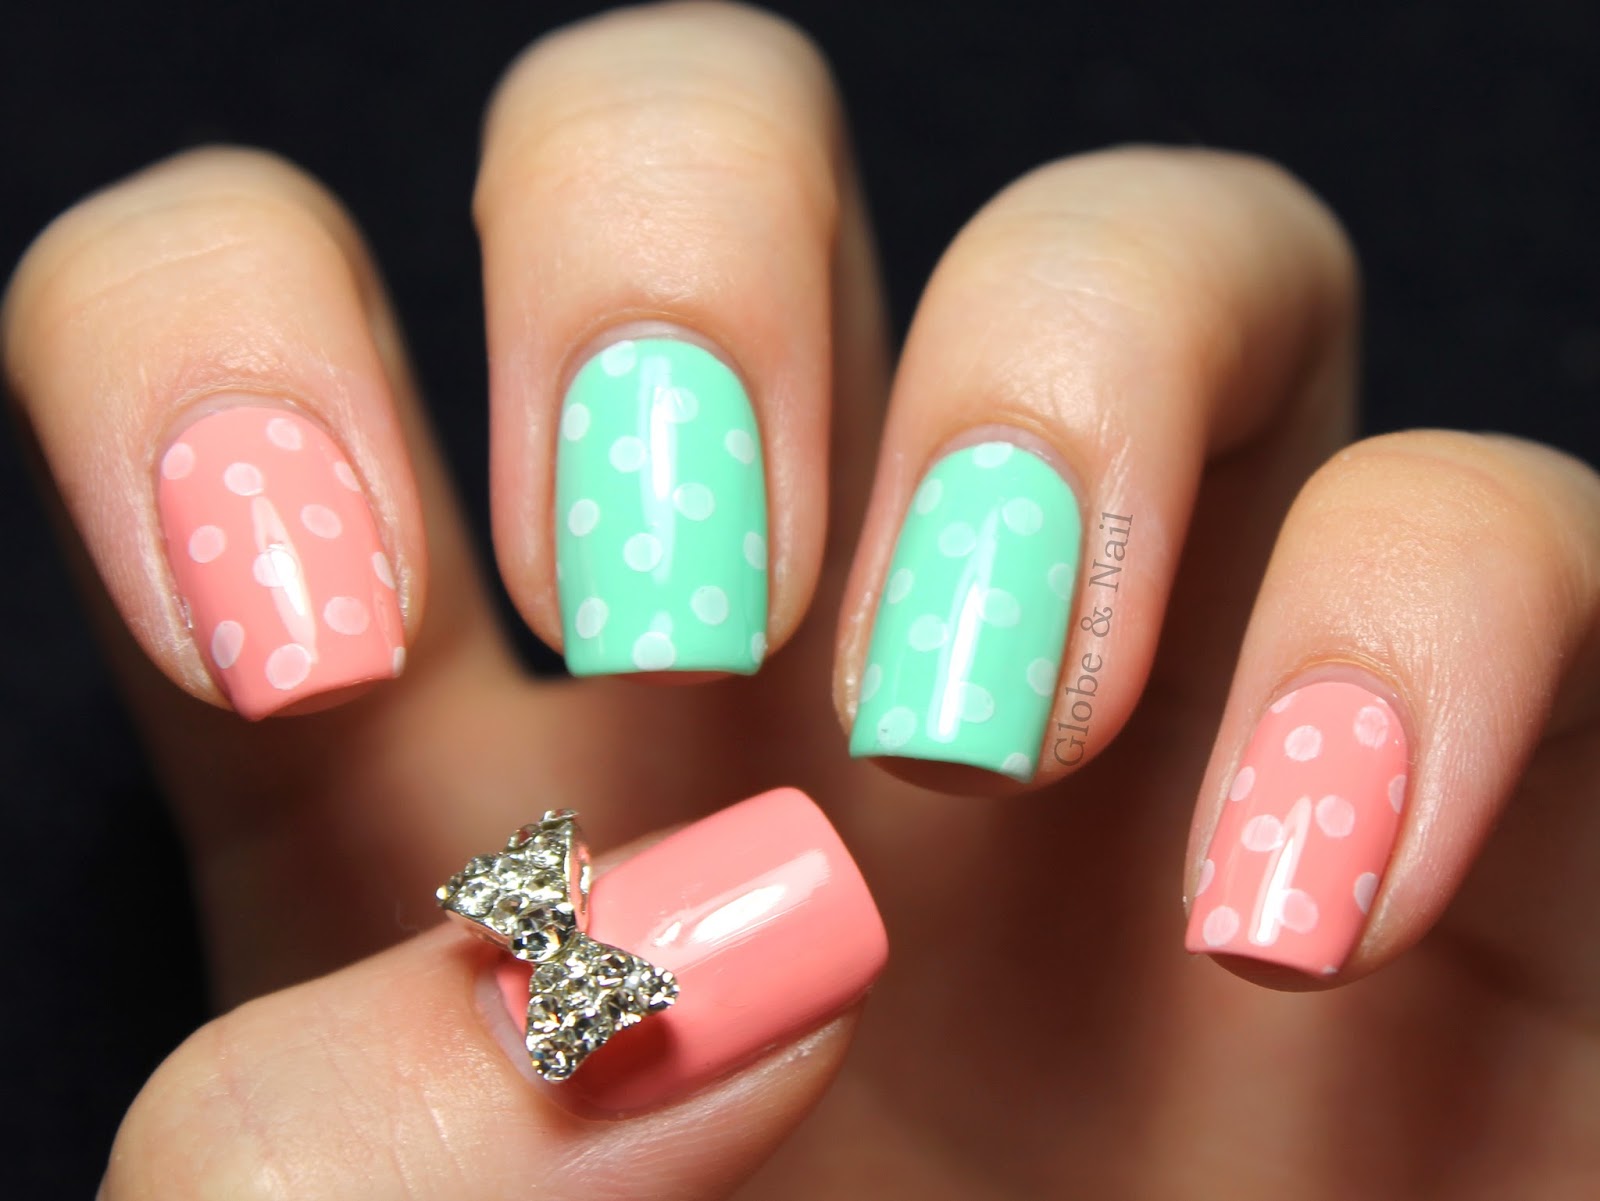 3D Nail Designs - wide 3